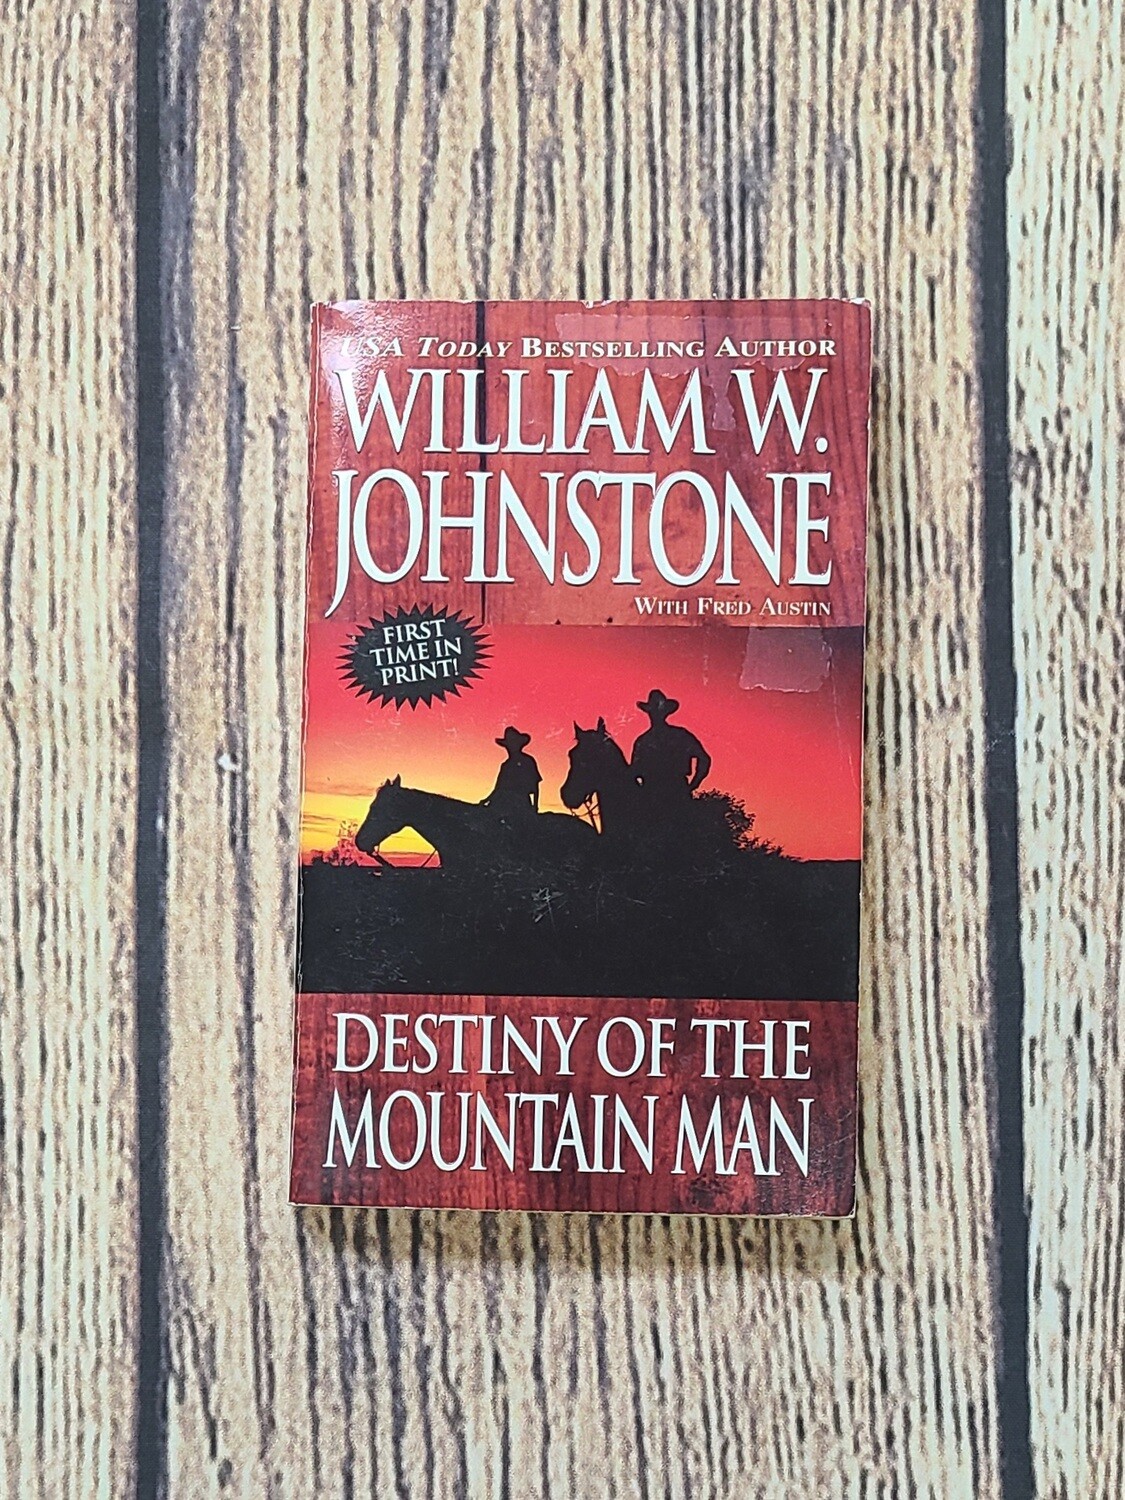 Destiny of the Mountain Man by William W. Johnstone with Fred Austin